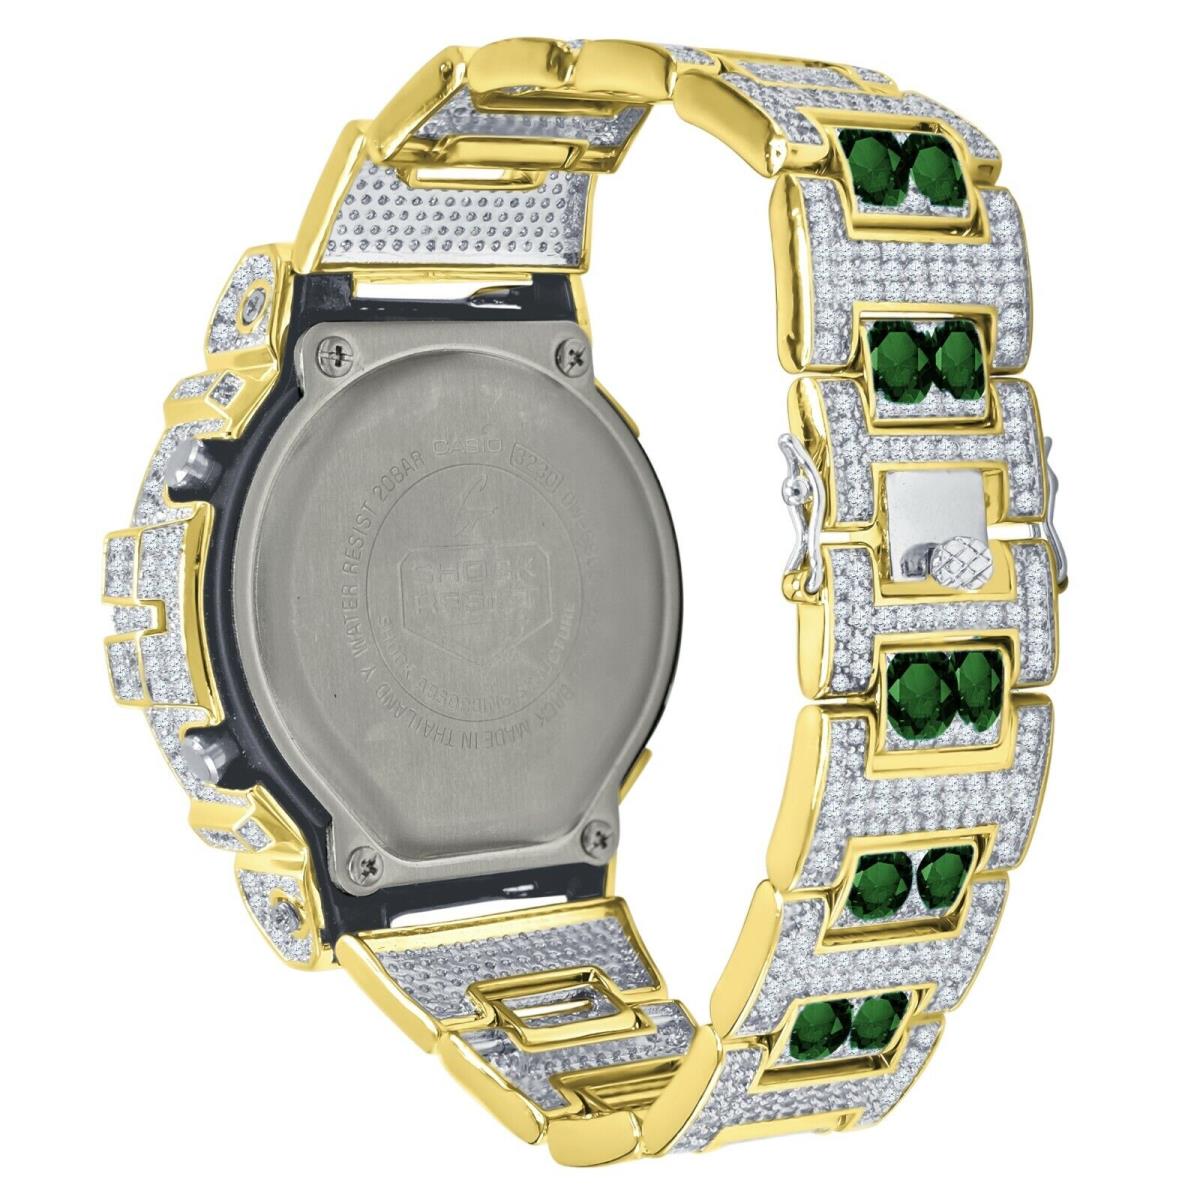 Casio jewelry  - Gold , Yellow Gold Dial, Yellow Gold, Green Emerald Band